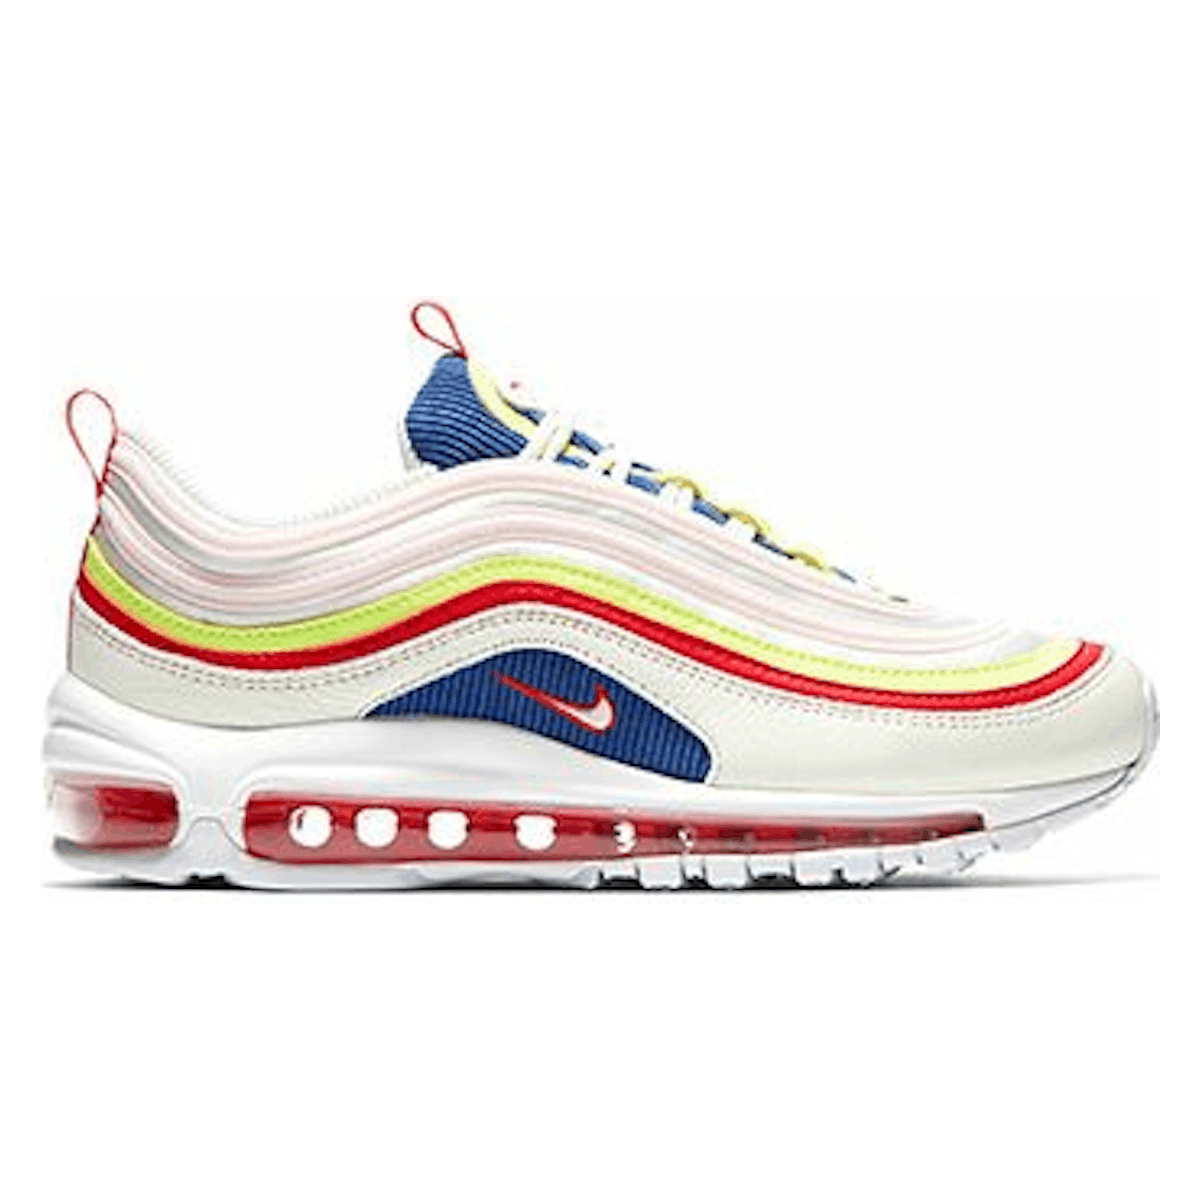 Nike WMNS Air Max 97 Special Edition White/Blue/Yellow